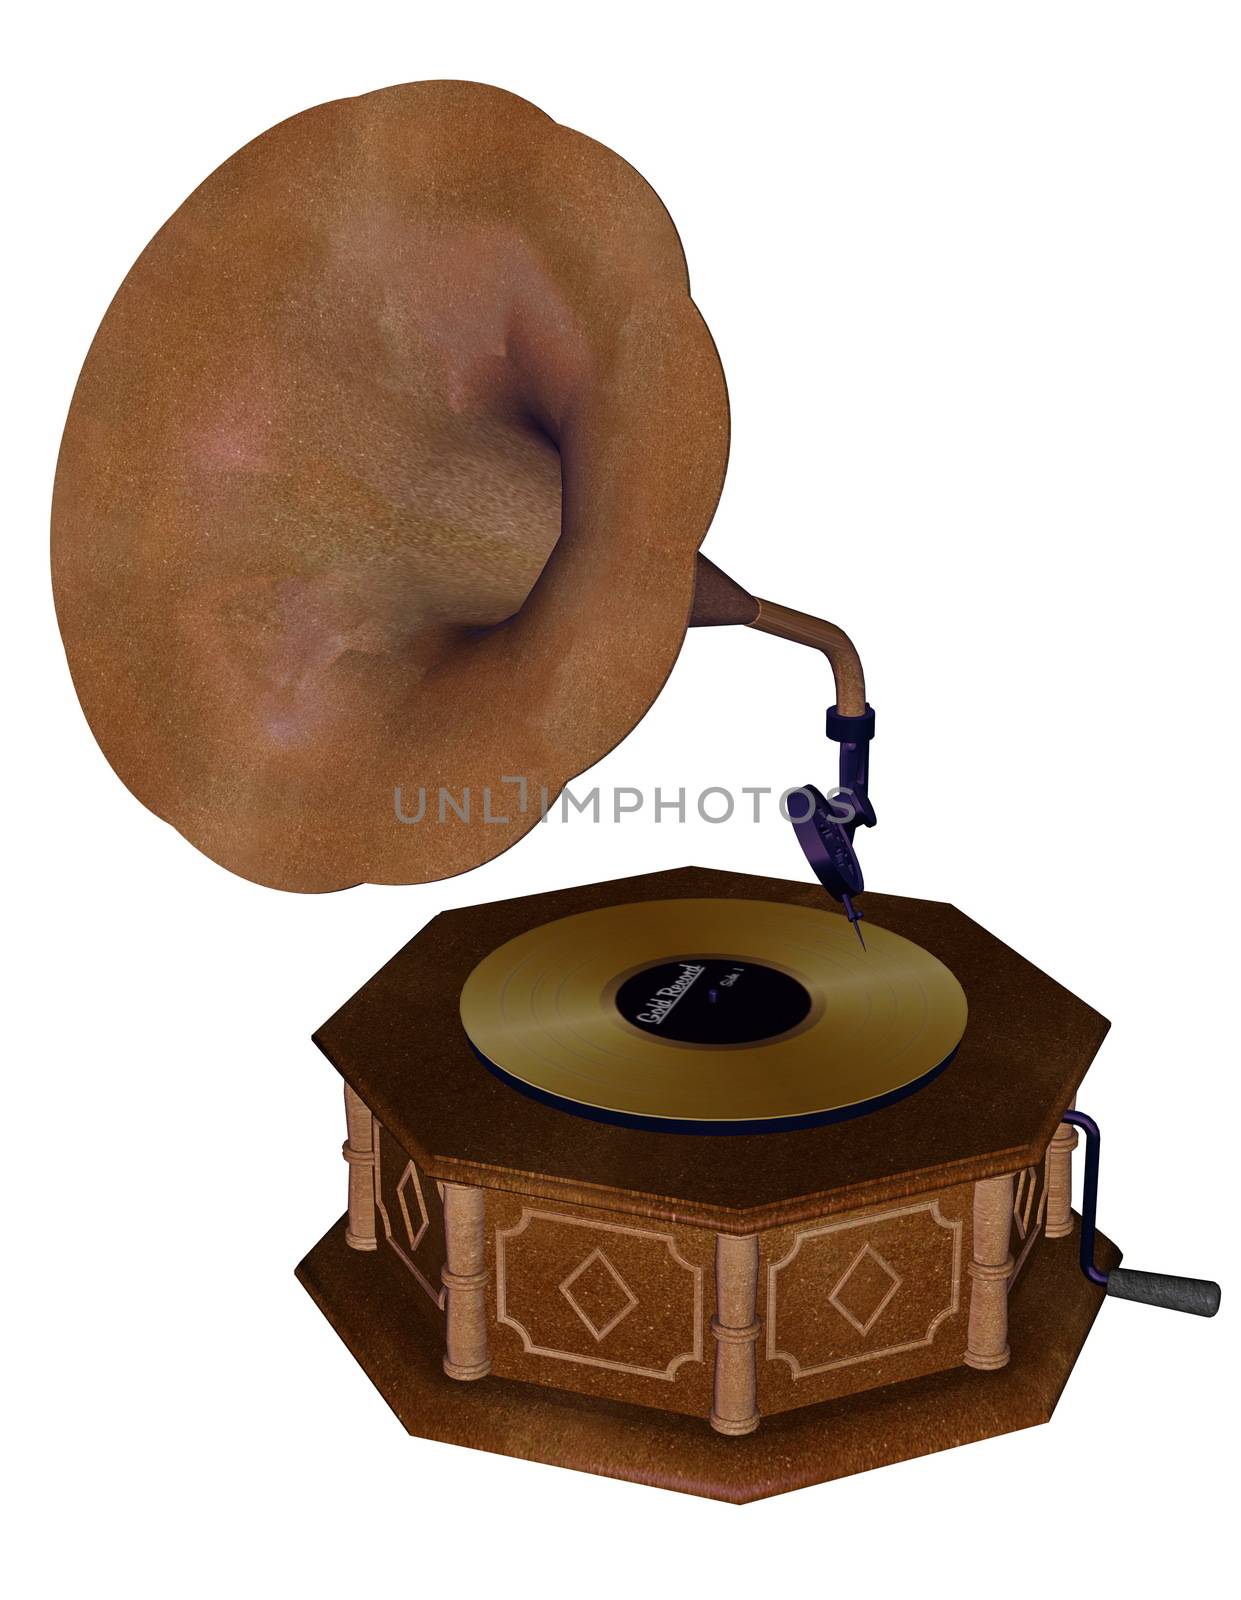 Old gramophone with horn speaker in white background